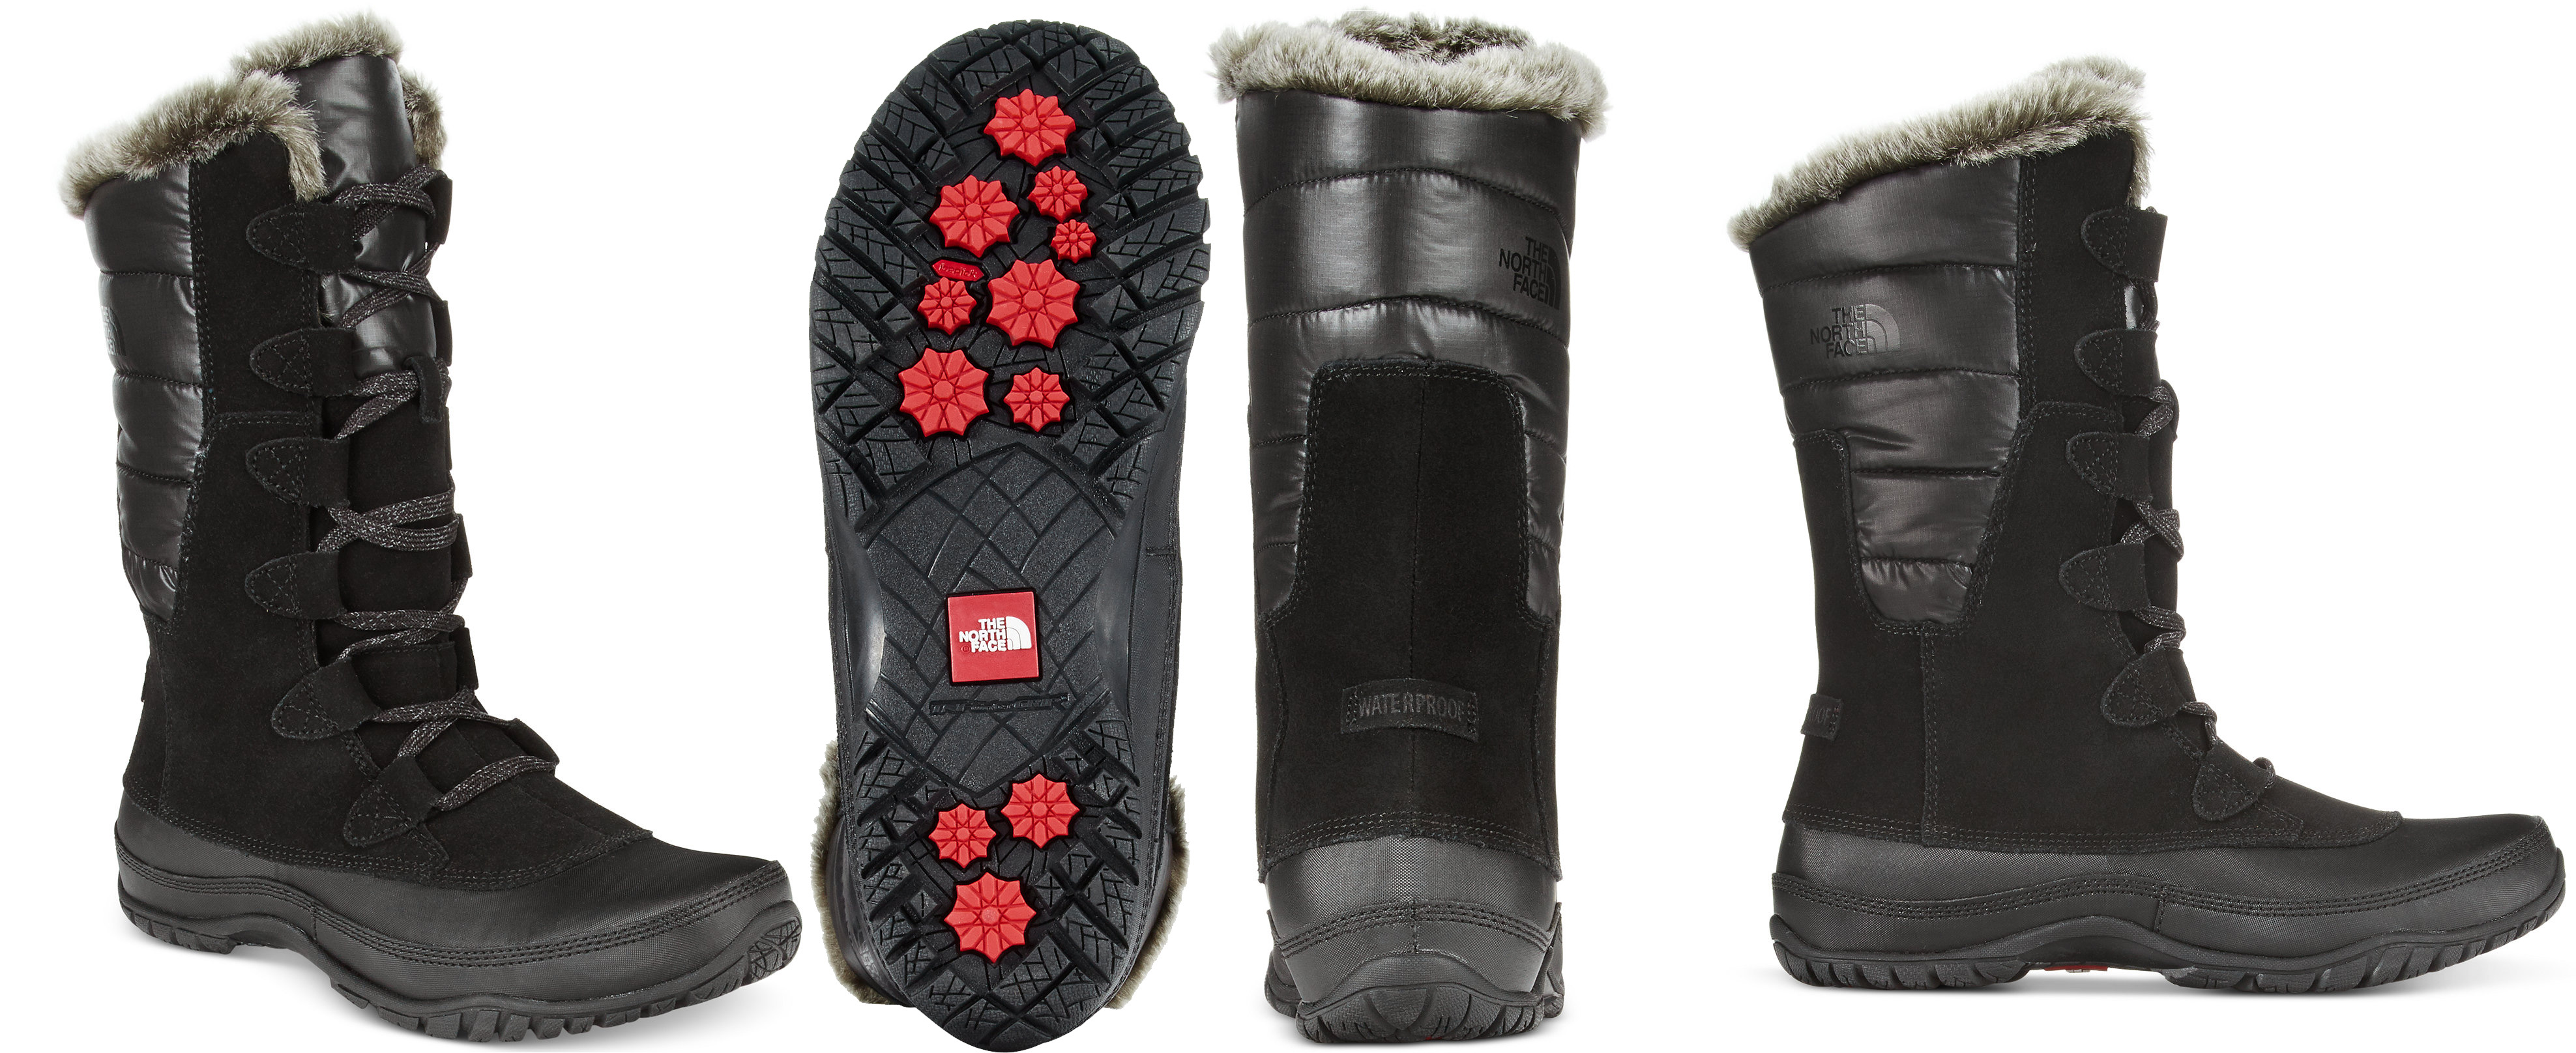 The North Face Women's Nuptse Purna Faux-fur boots in black